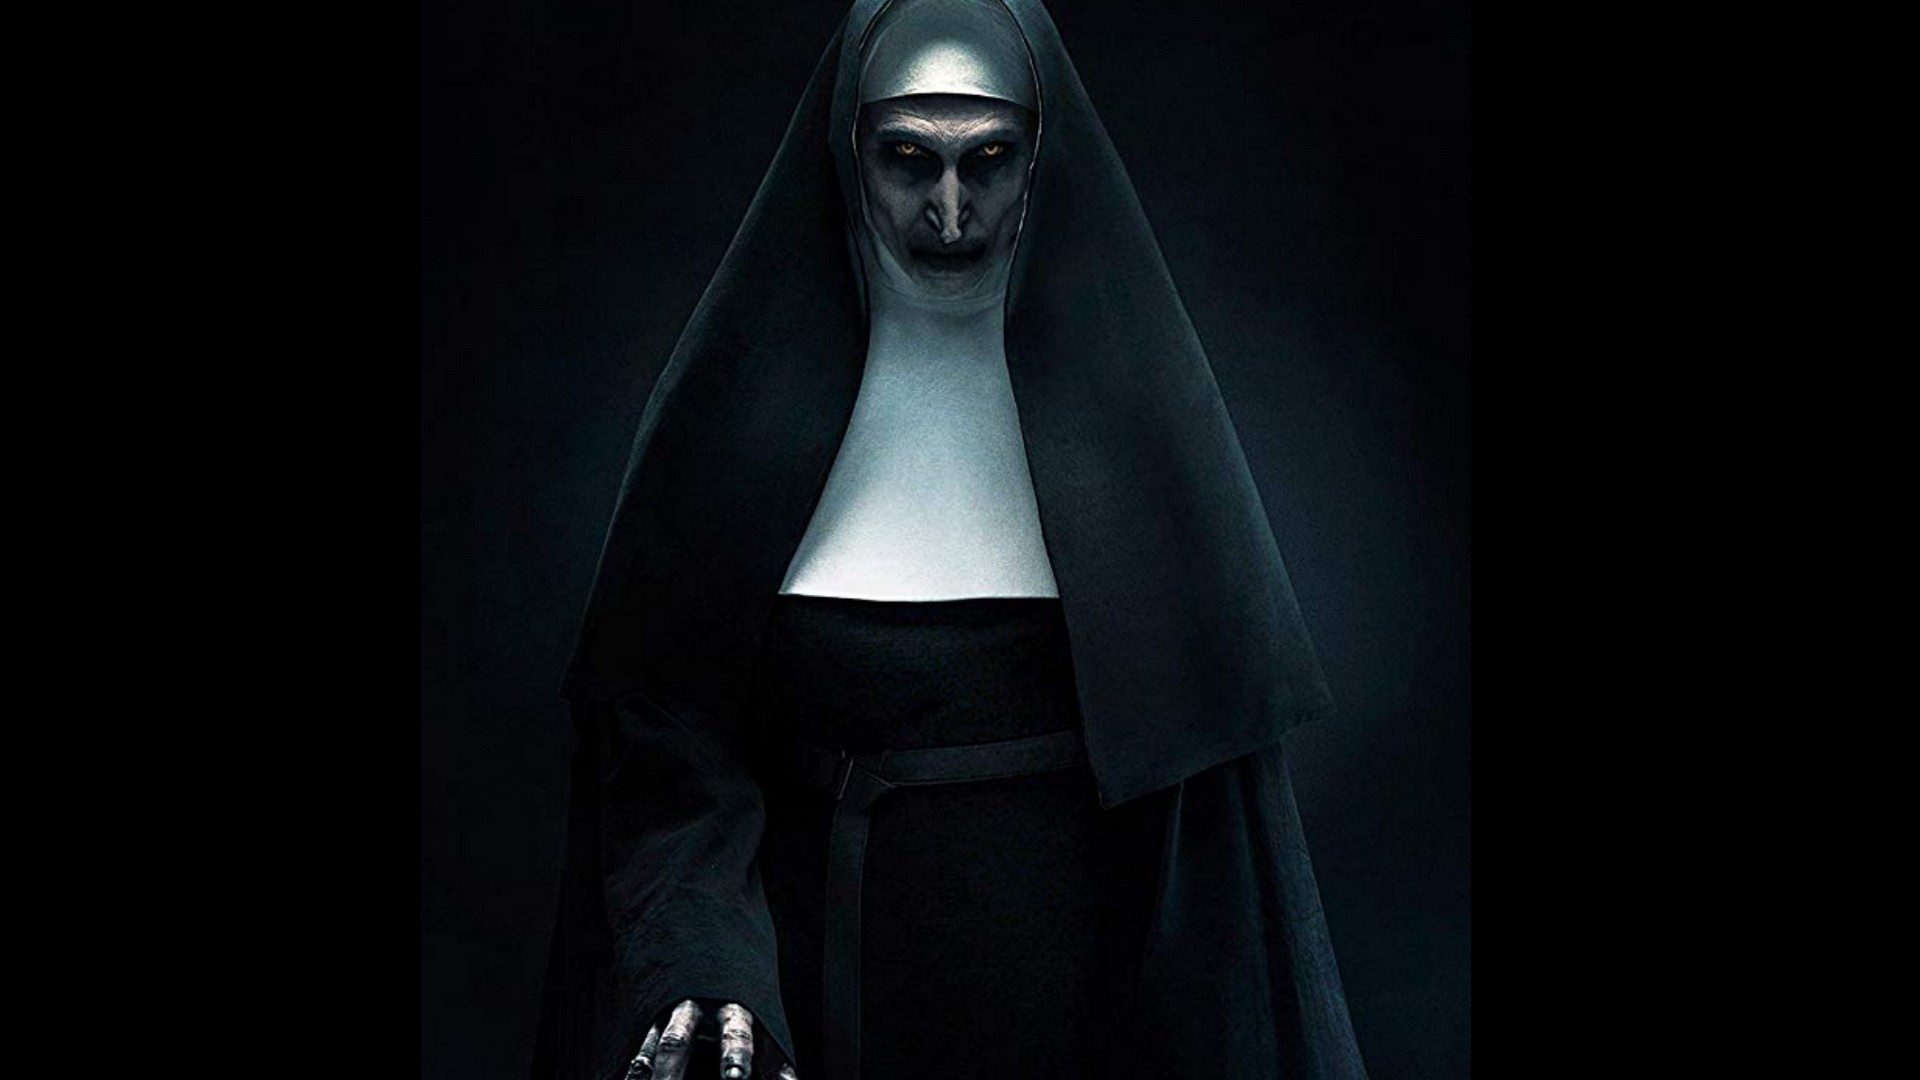 The Nun Wallpaper with resolution 1920X1080 pixel. You can use this wallpaper as background for your desktop Computer Screensavers, Android or iPhone smartphones